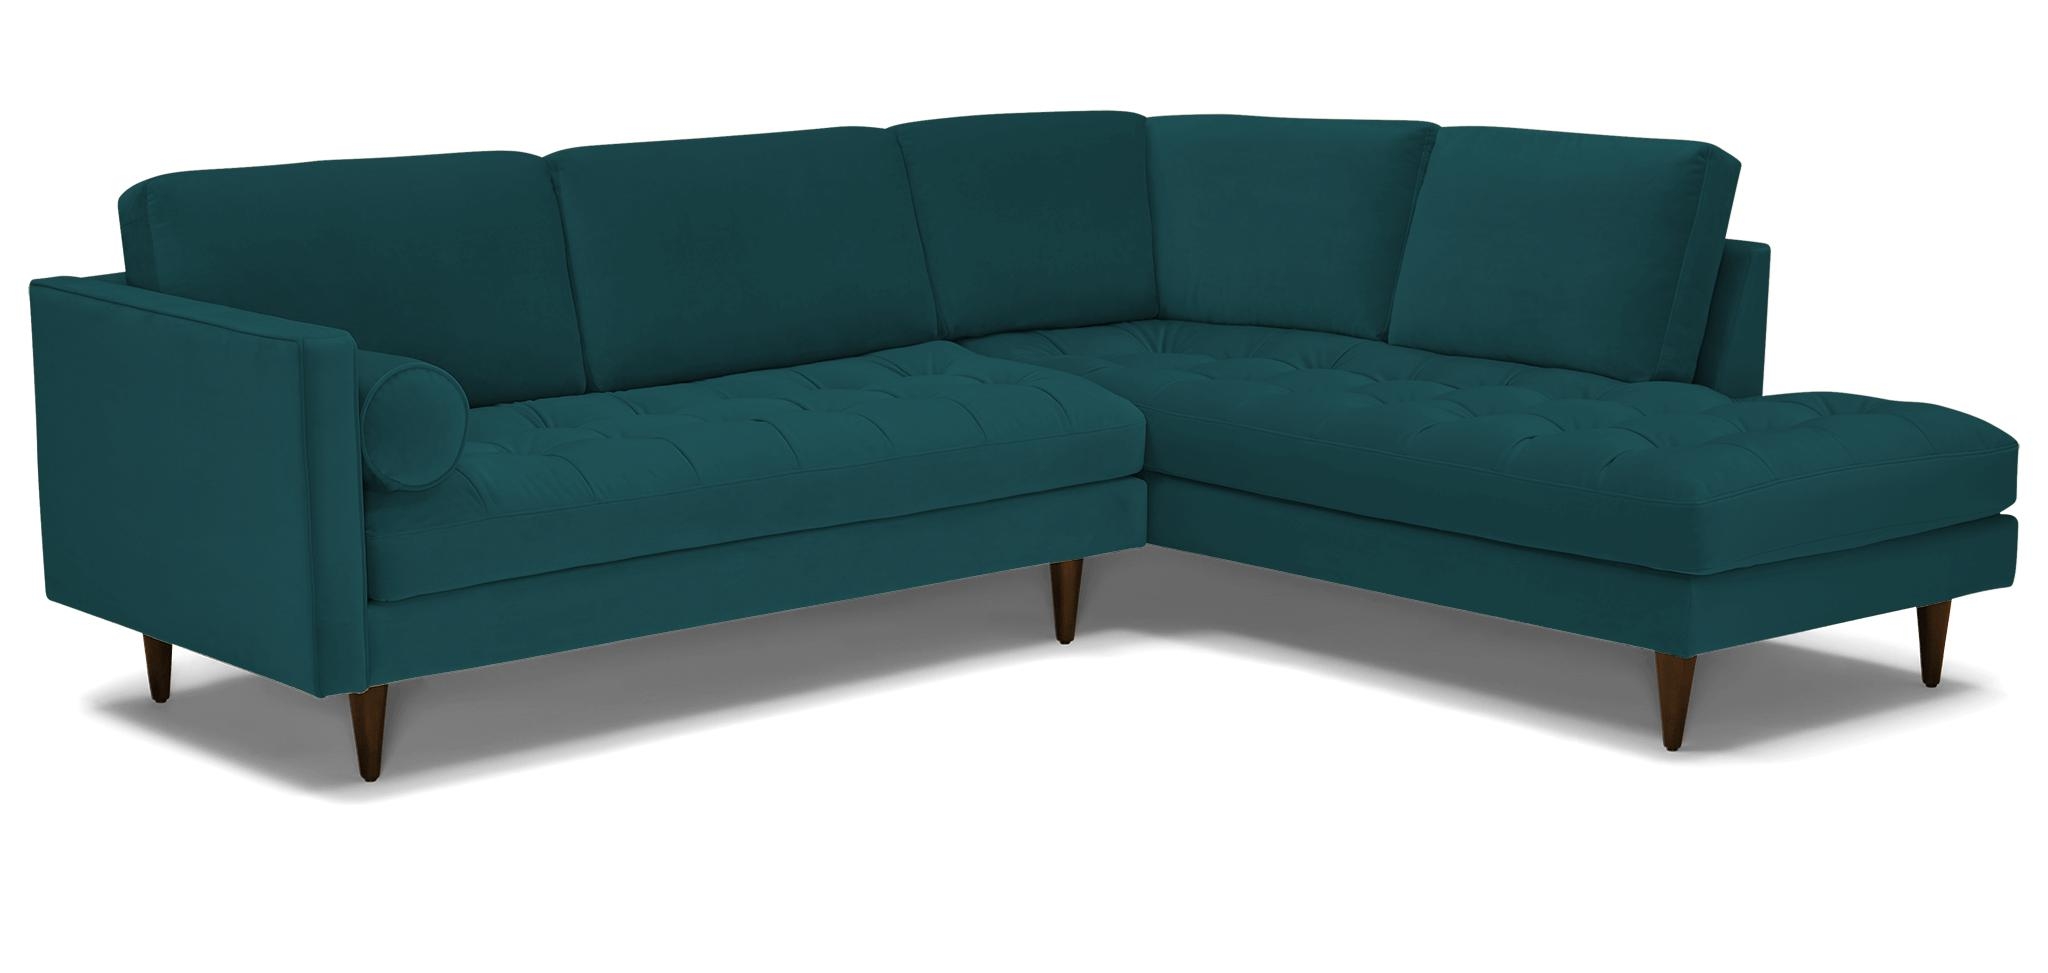 Blue Briar Mid Century Modern Sectional with Bumper - Royale Peacock - Mocha - Left - Image 2